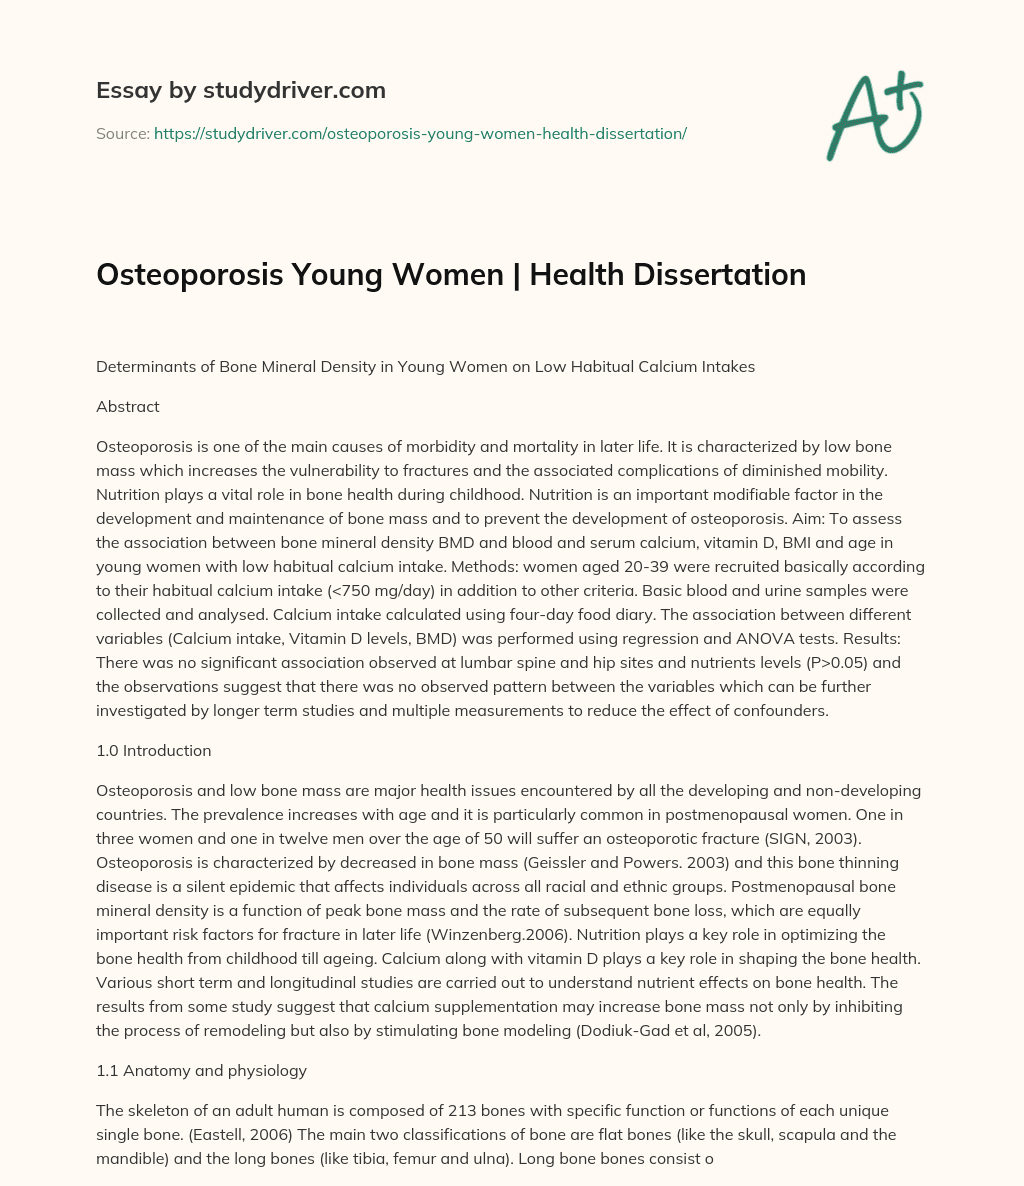 Osteoporosis Young Women | Health Dissertation essay